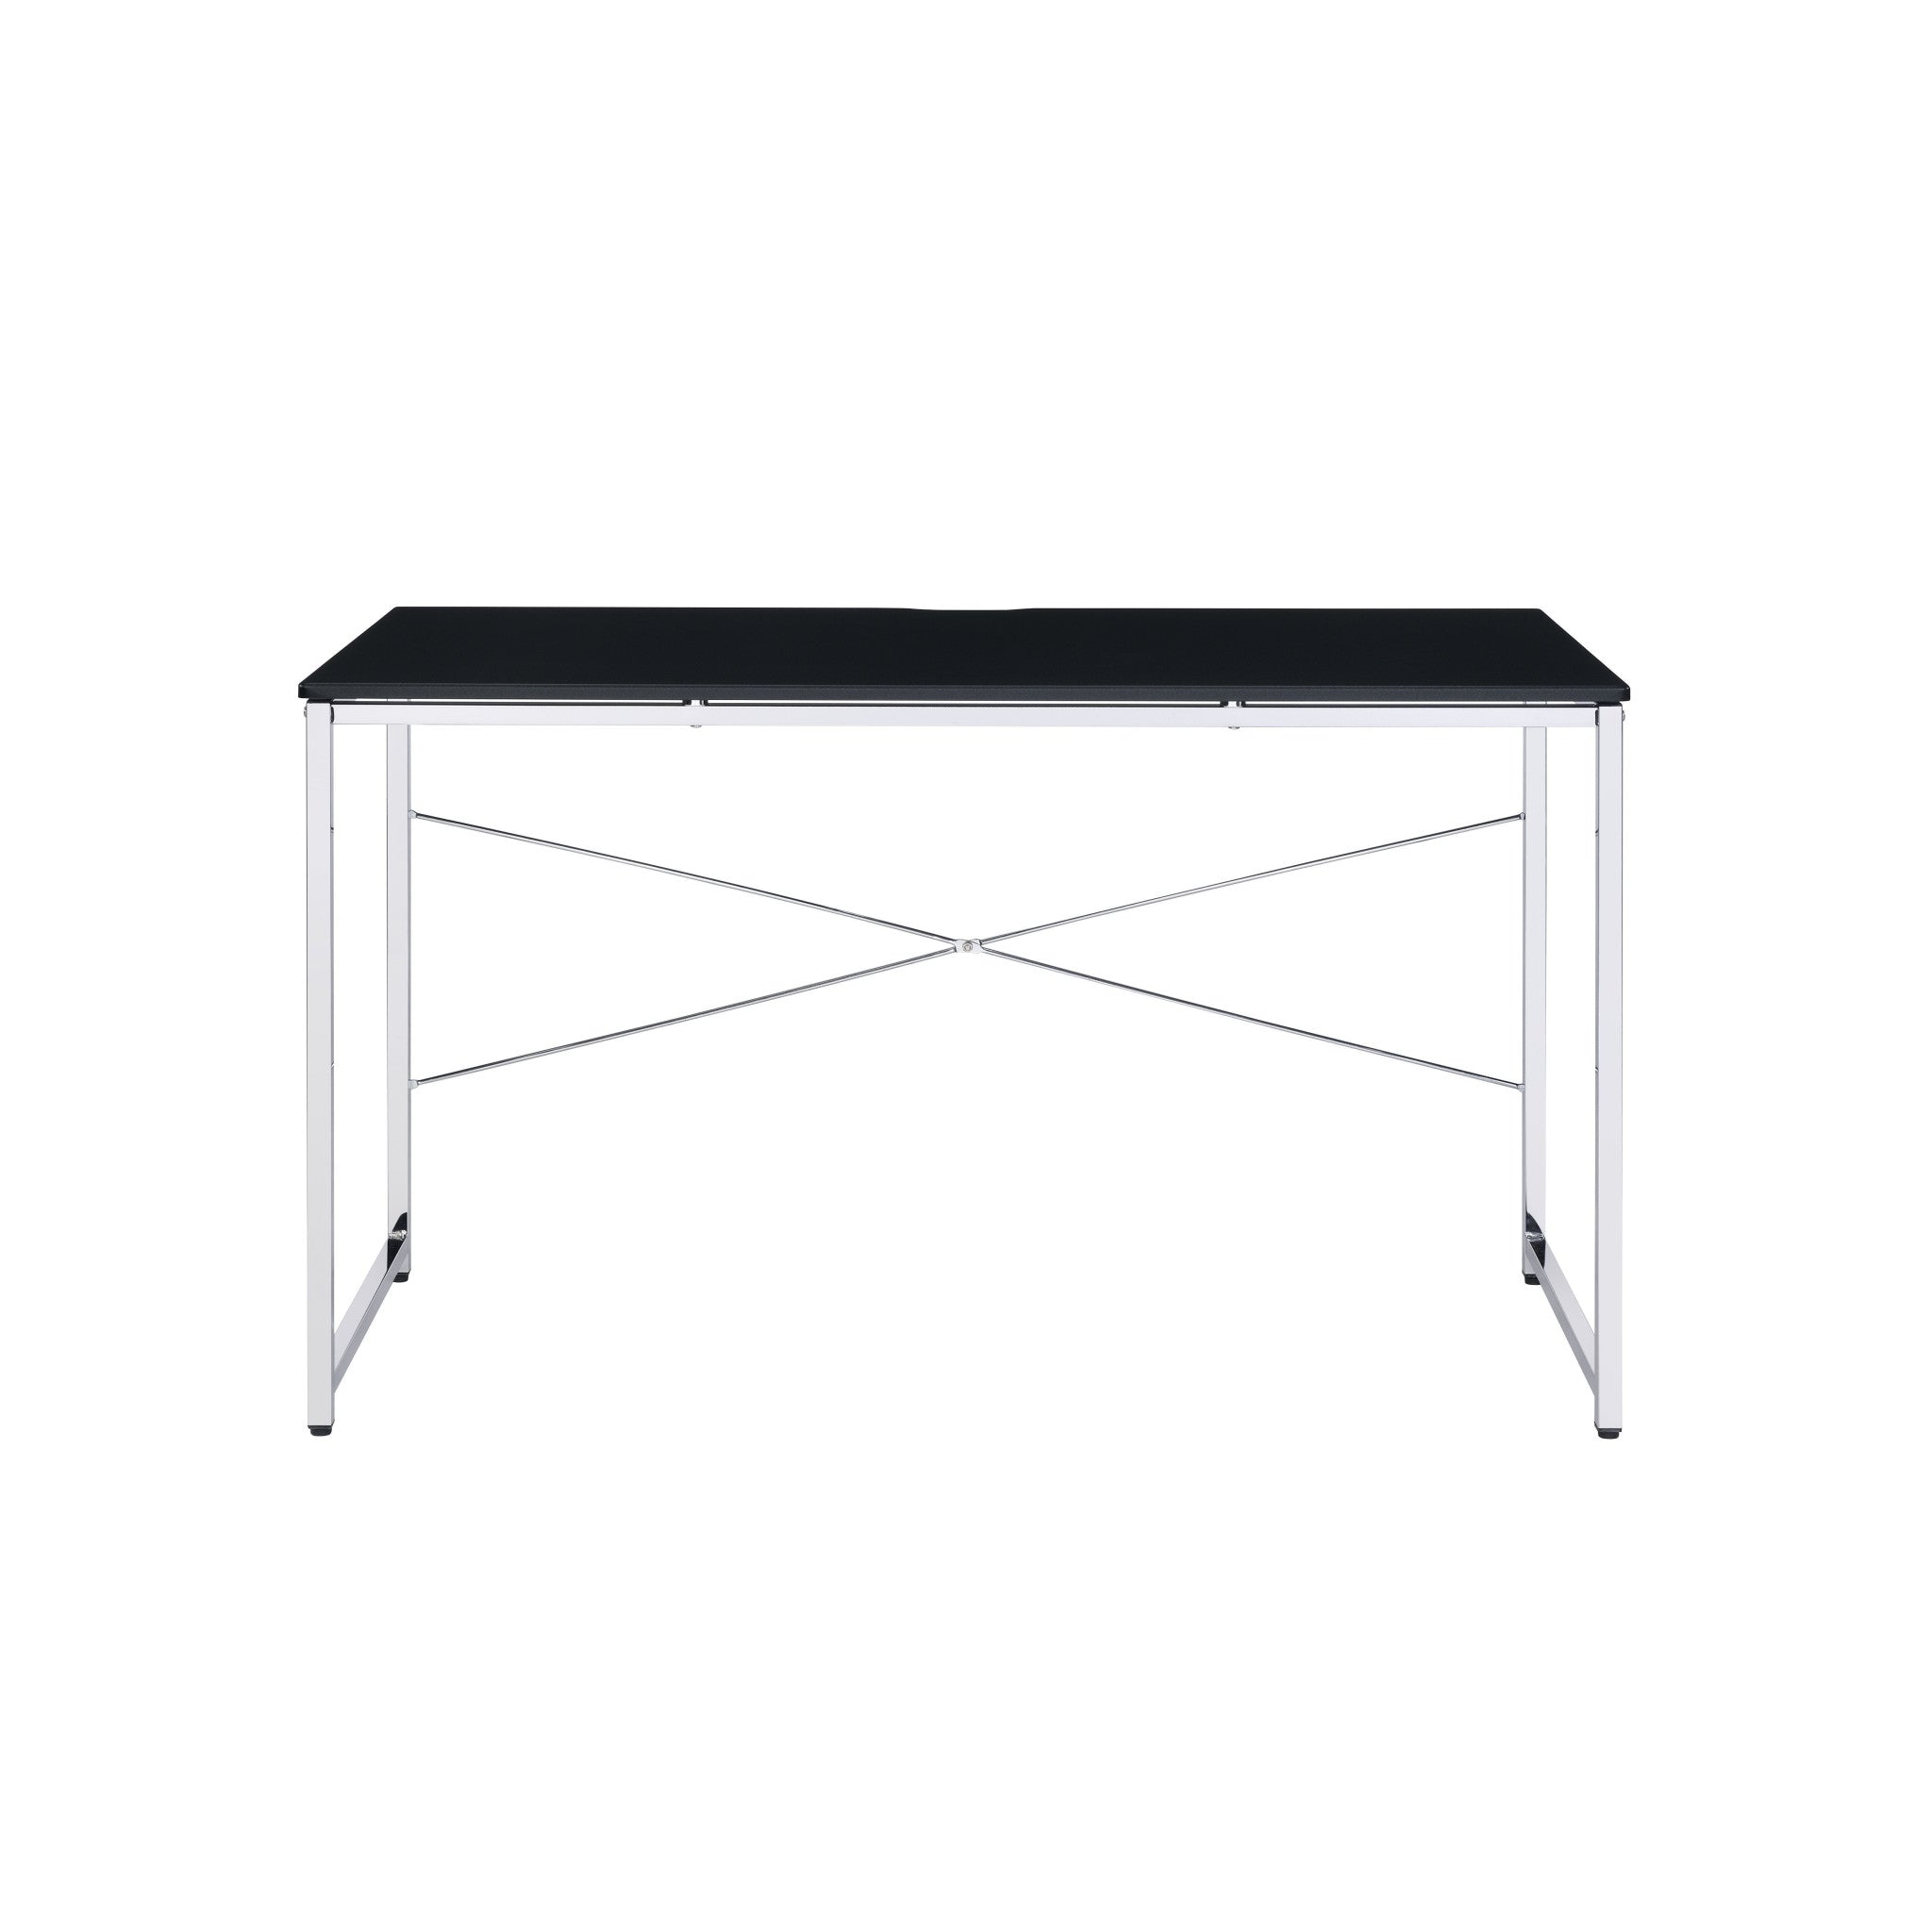 47" Black and Silver Writing Desk